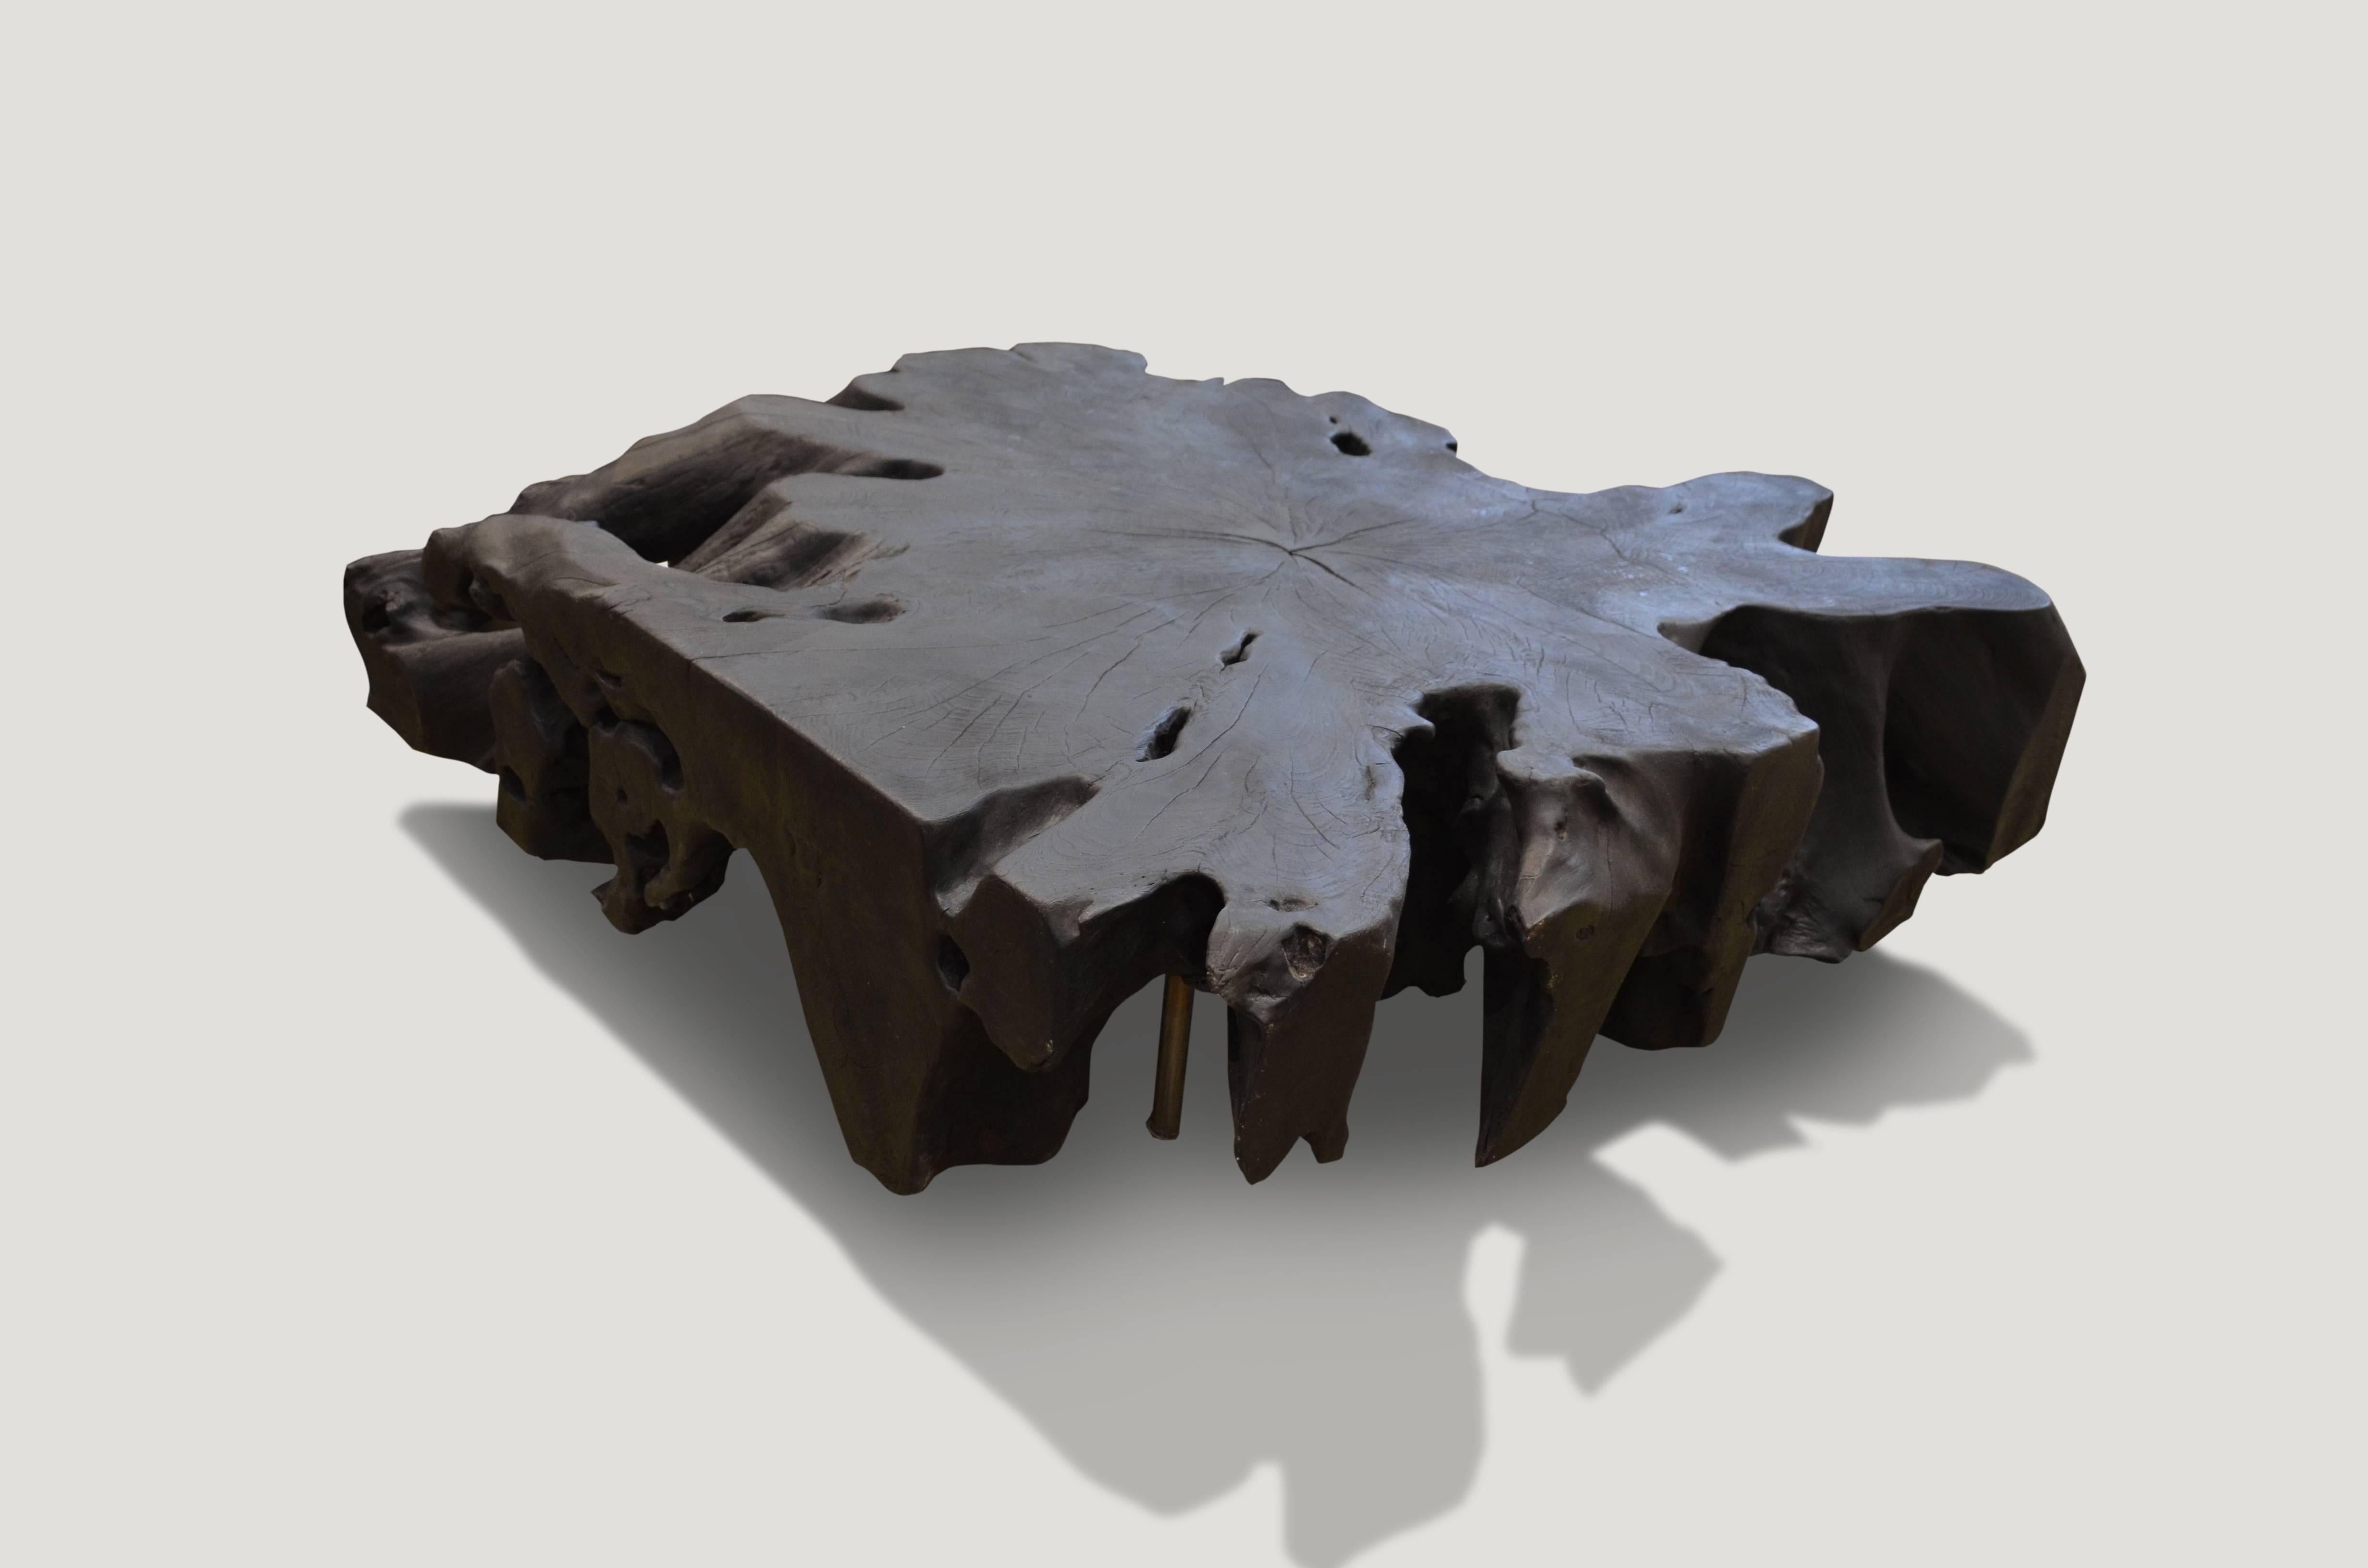 Organic shaped reclaimed teak root coffee table. Burnt, sanded and sealed with a smooth finish. Impressive 9” top floats on 6” steel legs.

The Triple Burnt Collection represents a unique line of modern furniture made from solid organic wood. Burnt